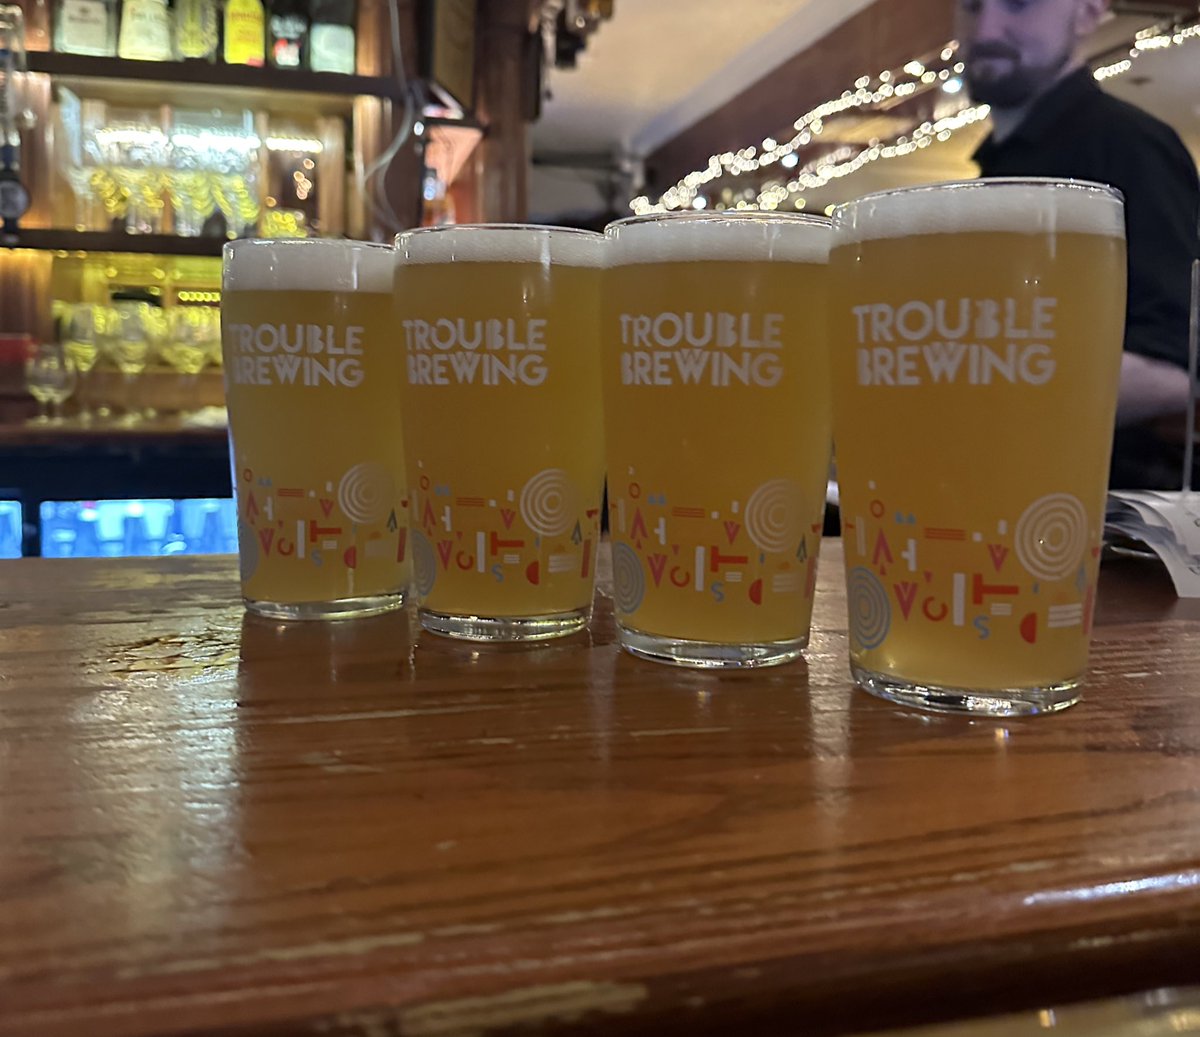 Lads… other people are on the ambush @57theheadline @troublebrewing